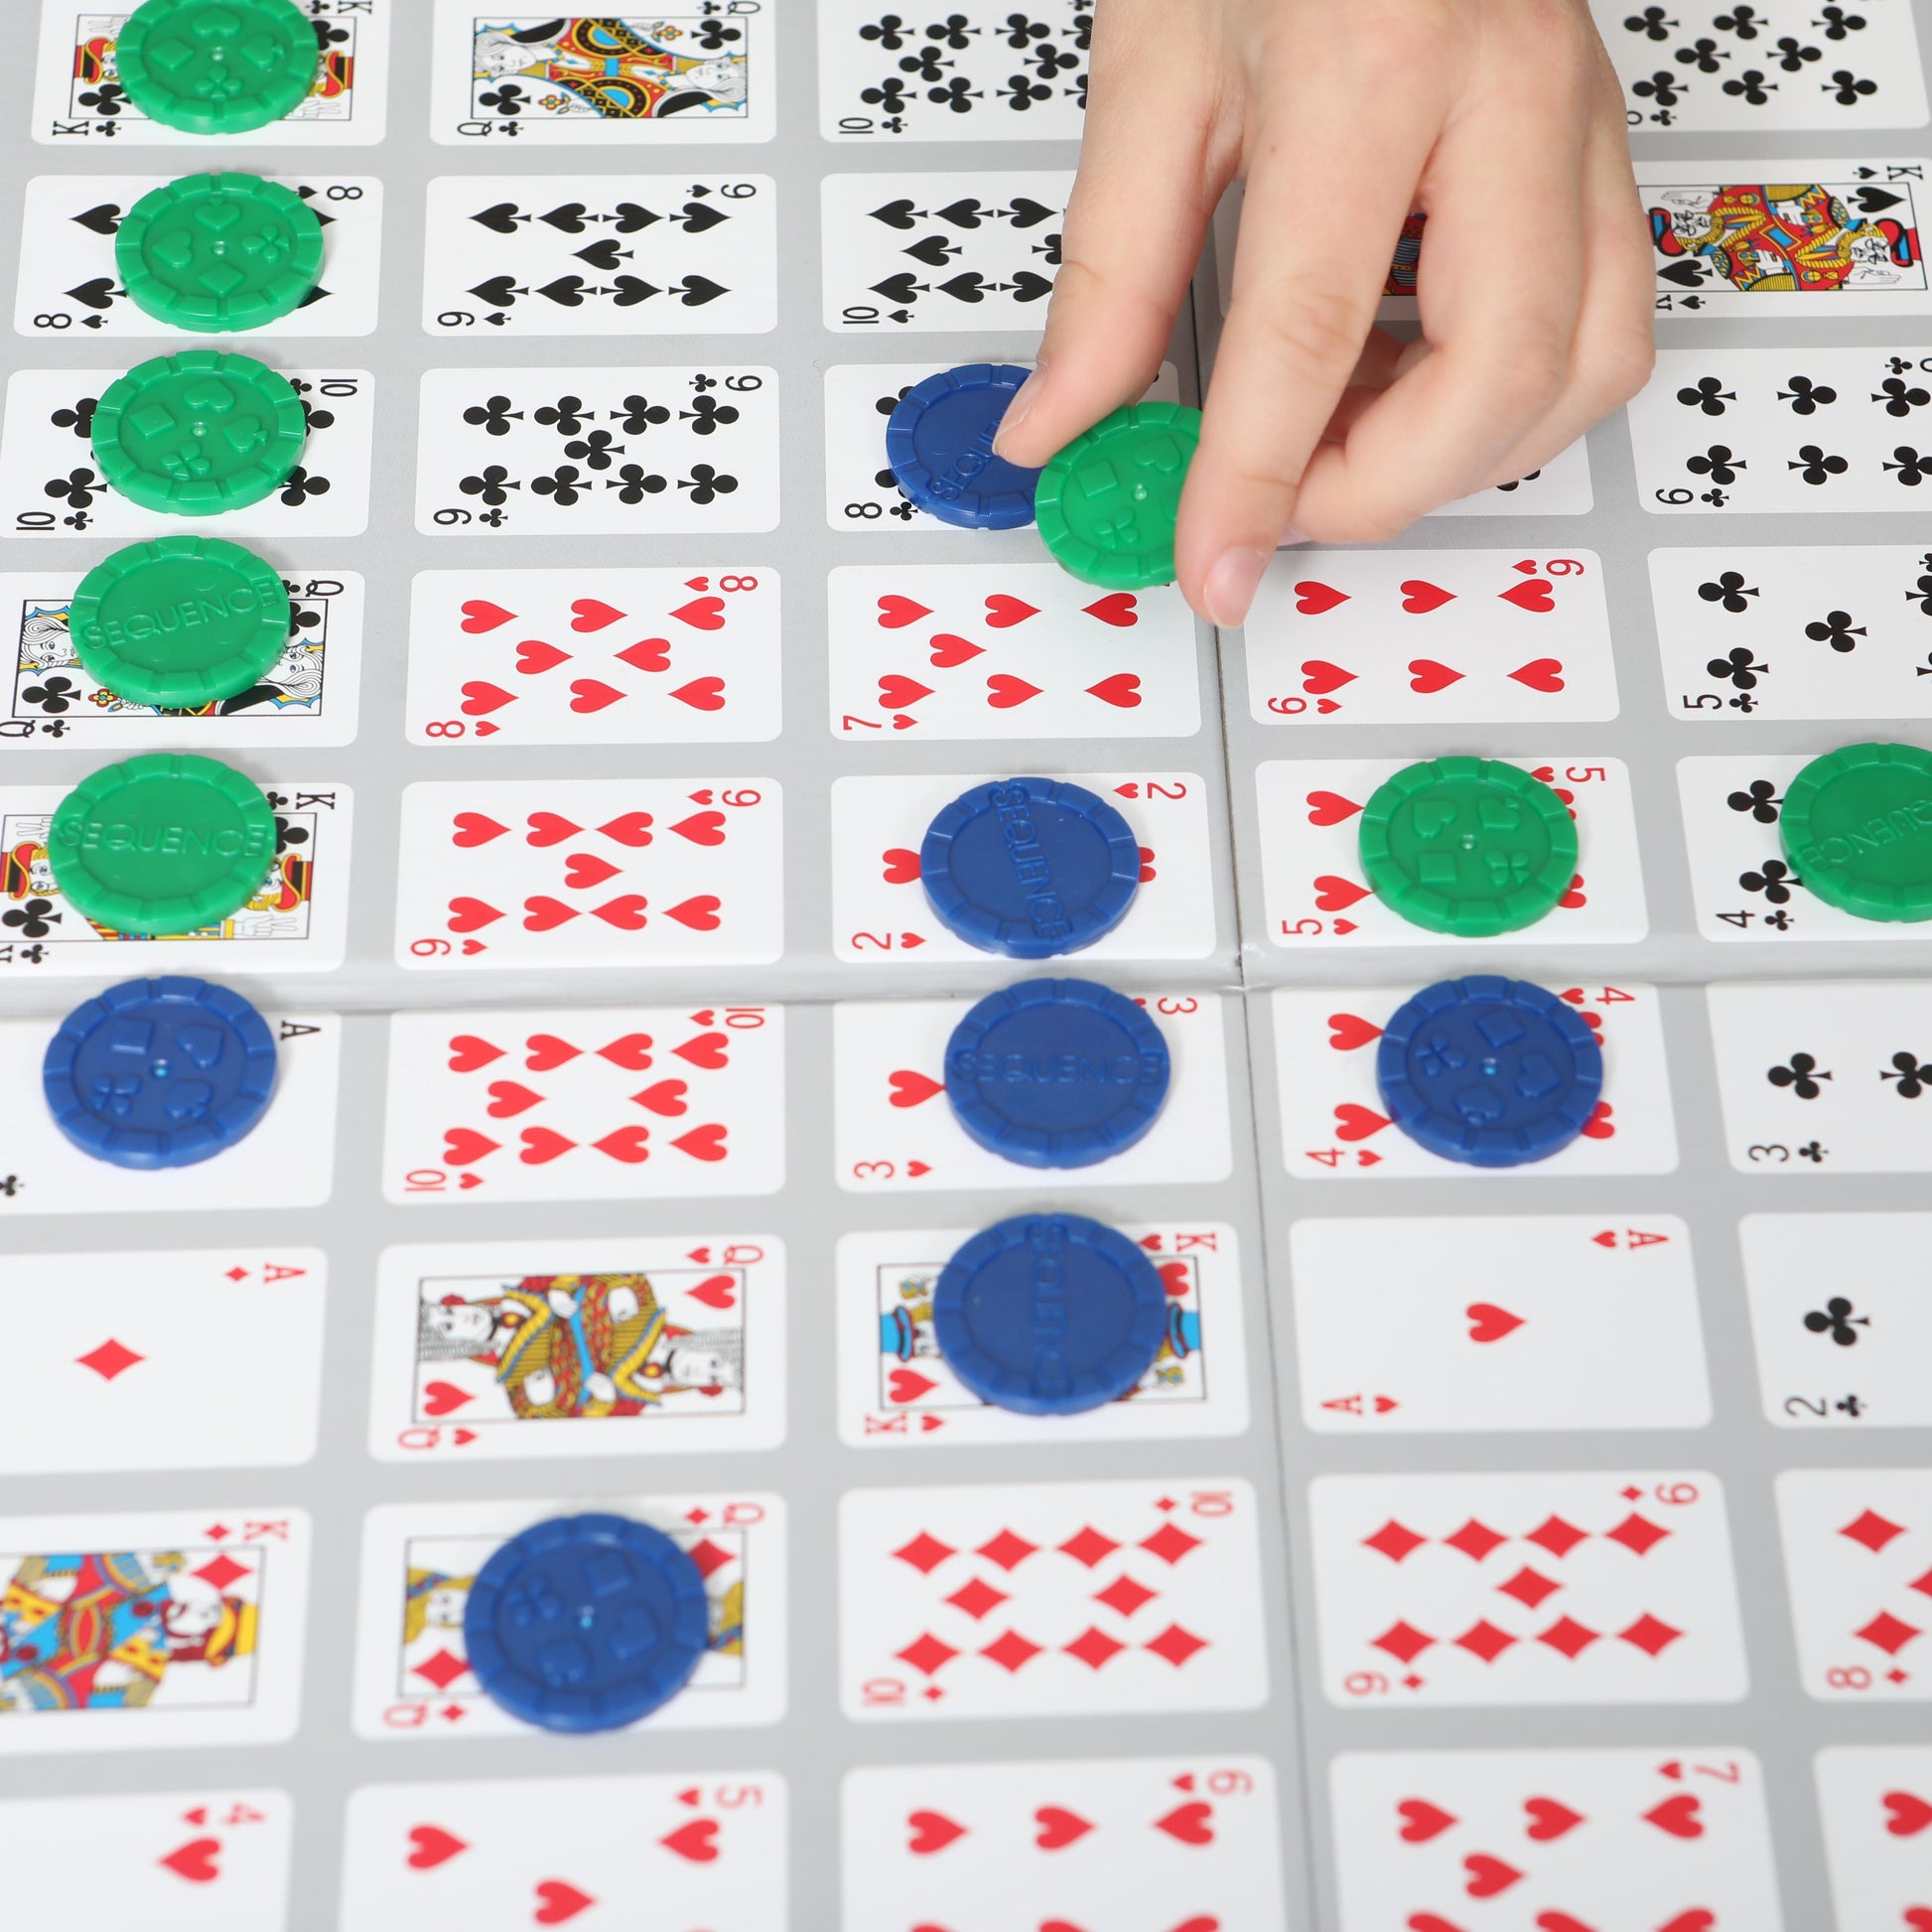 Sequence, Board Game